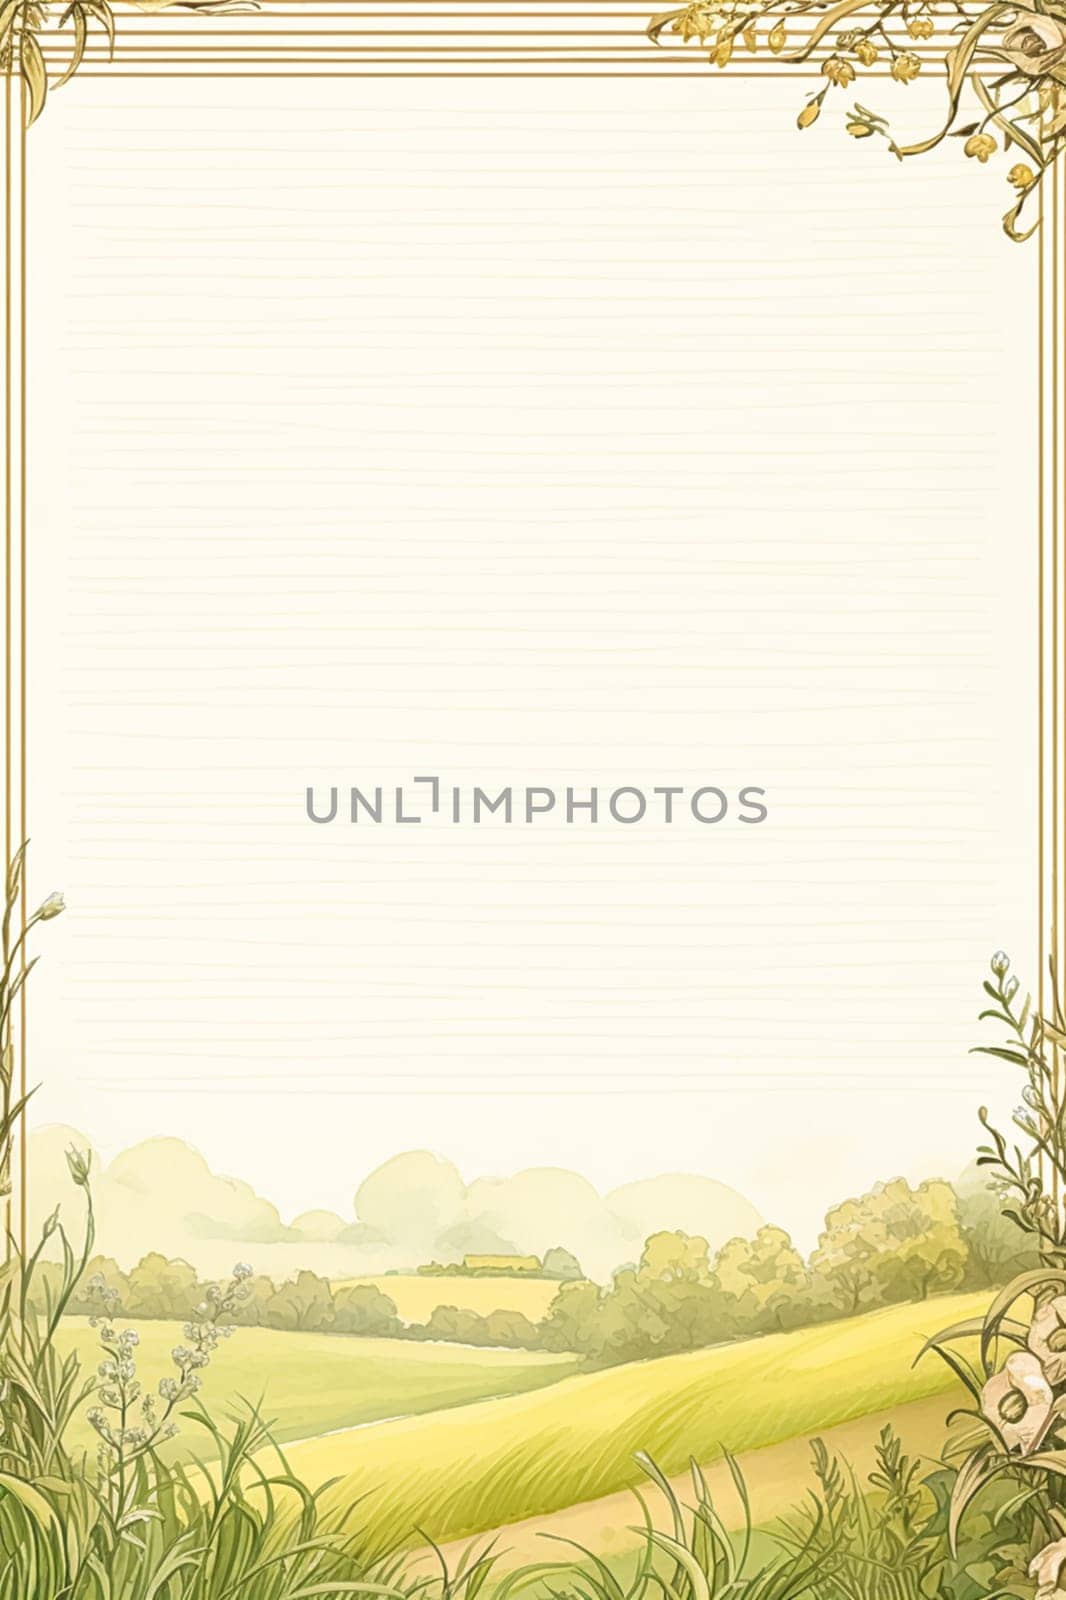 Book cover, digital paper illustration and greeting card design, English countryside style blank vintage art background for printable stationery, book page and ebook by Anneleven